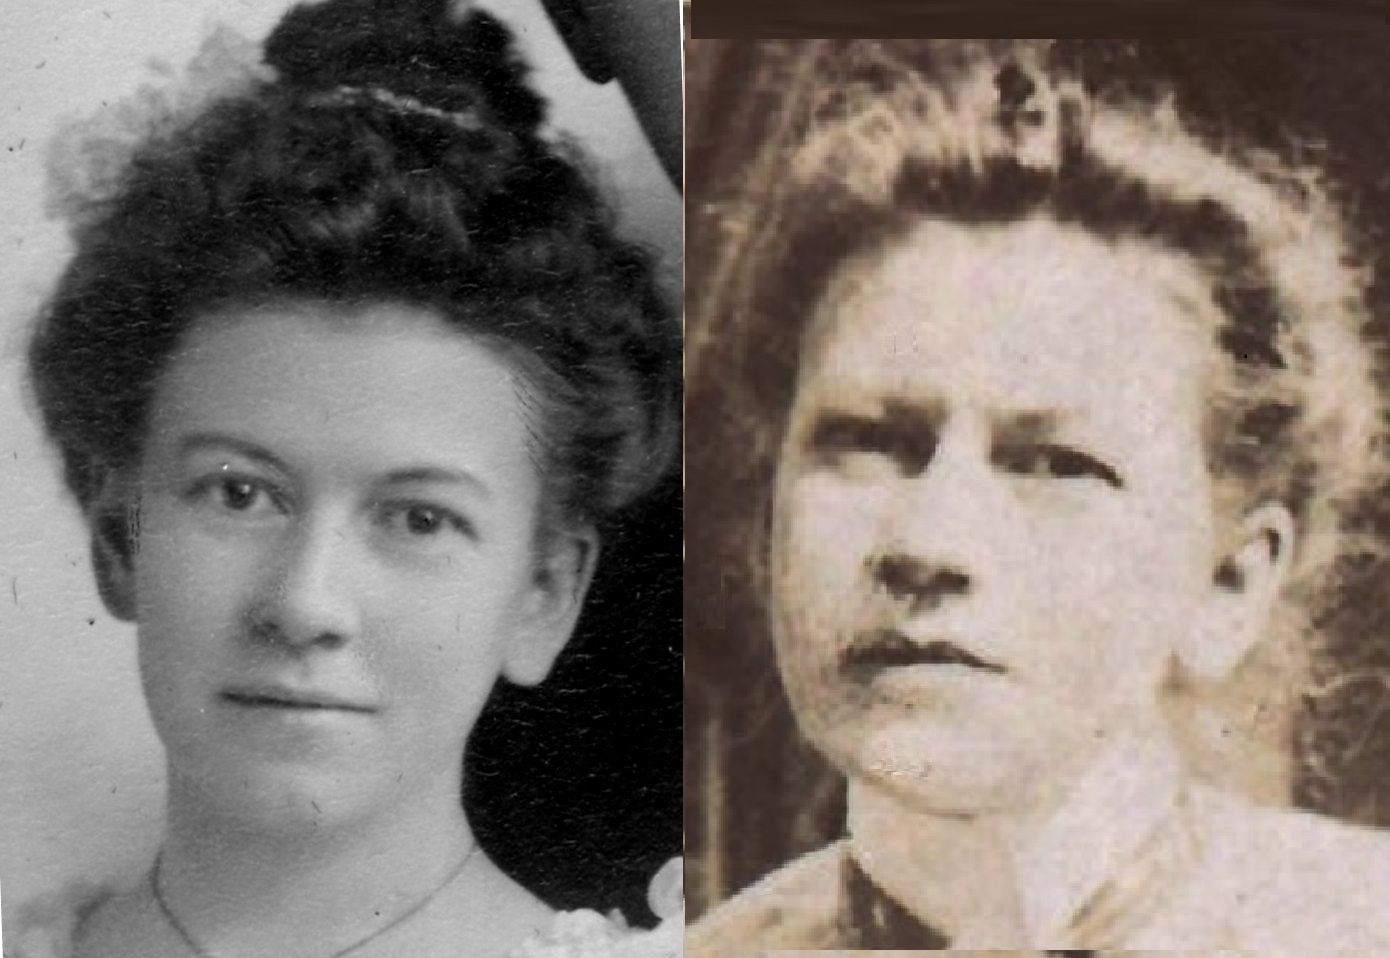 Addie: Before and After Enoch. The photo on the right was taken five years after her marriage to Enoch. She was 29 years old, and shed be dead soon after this photo was taken. 